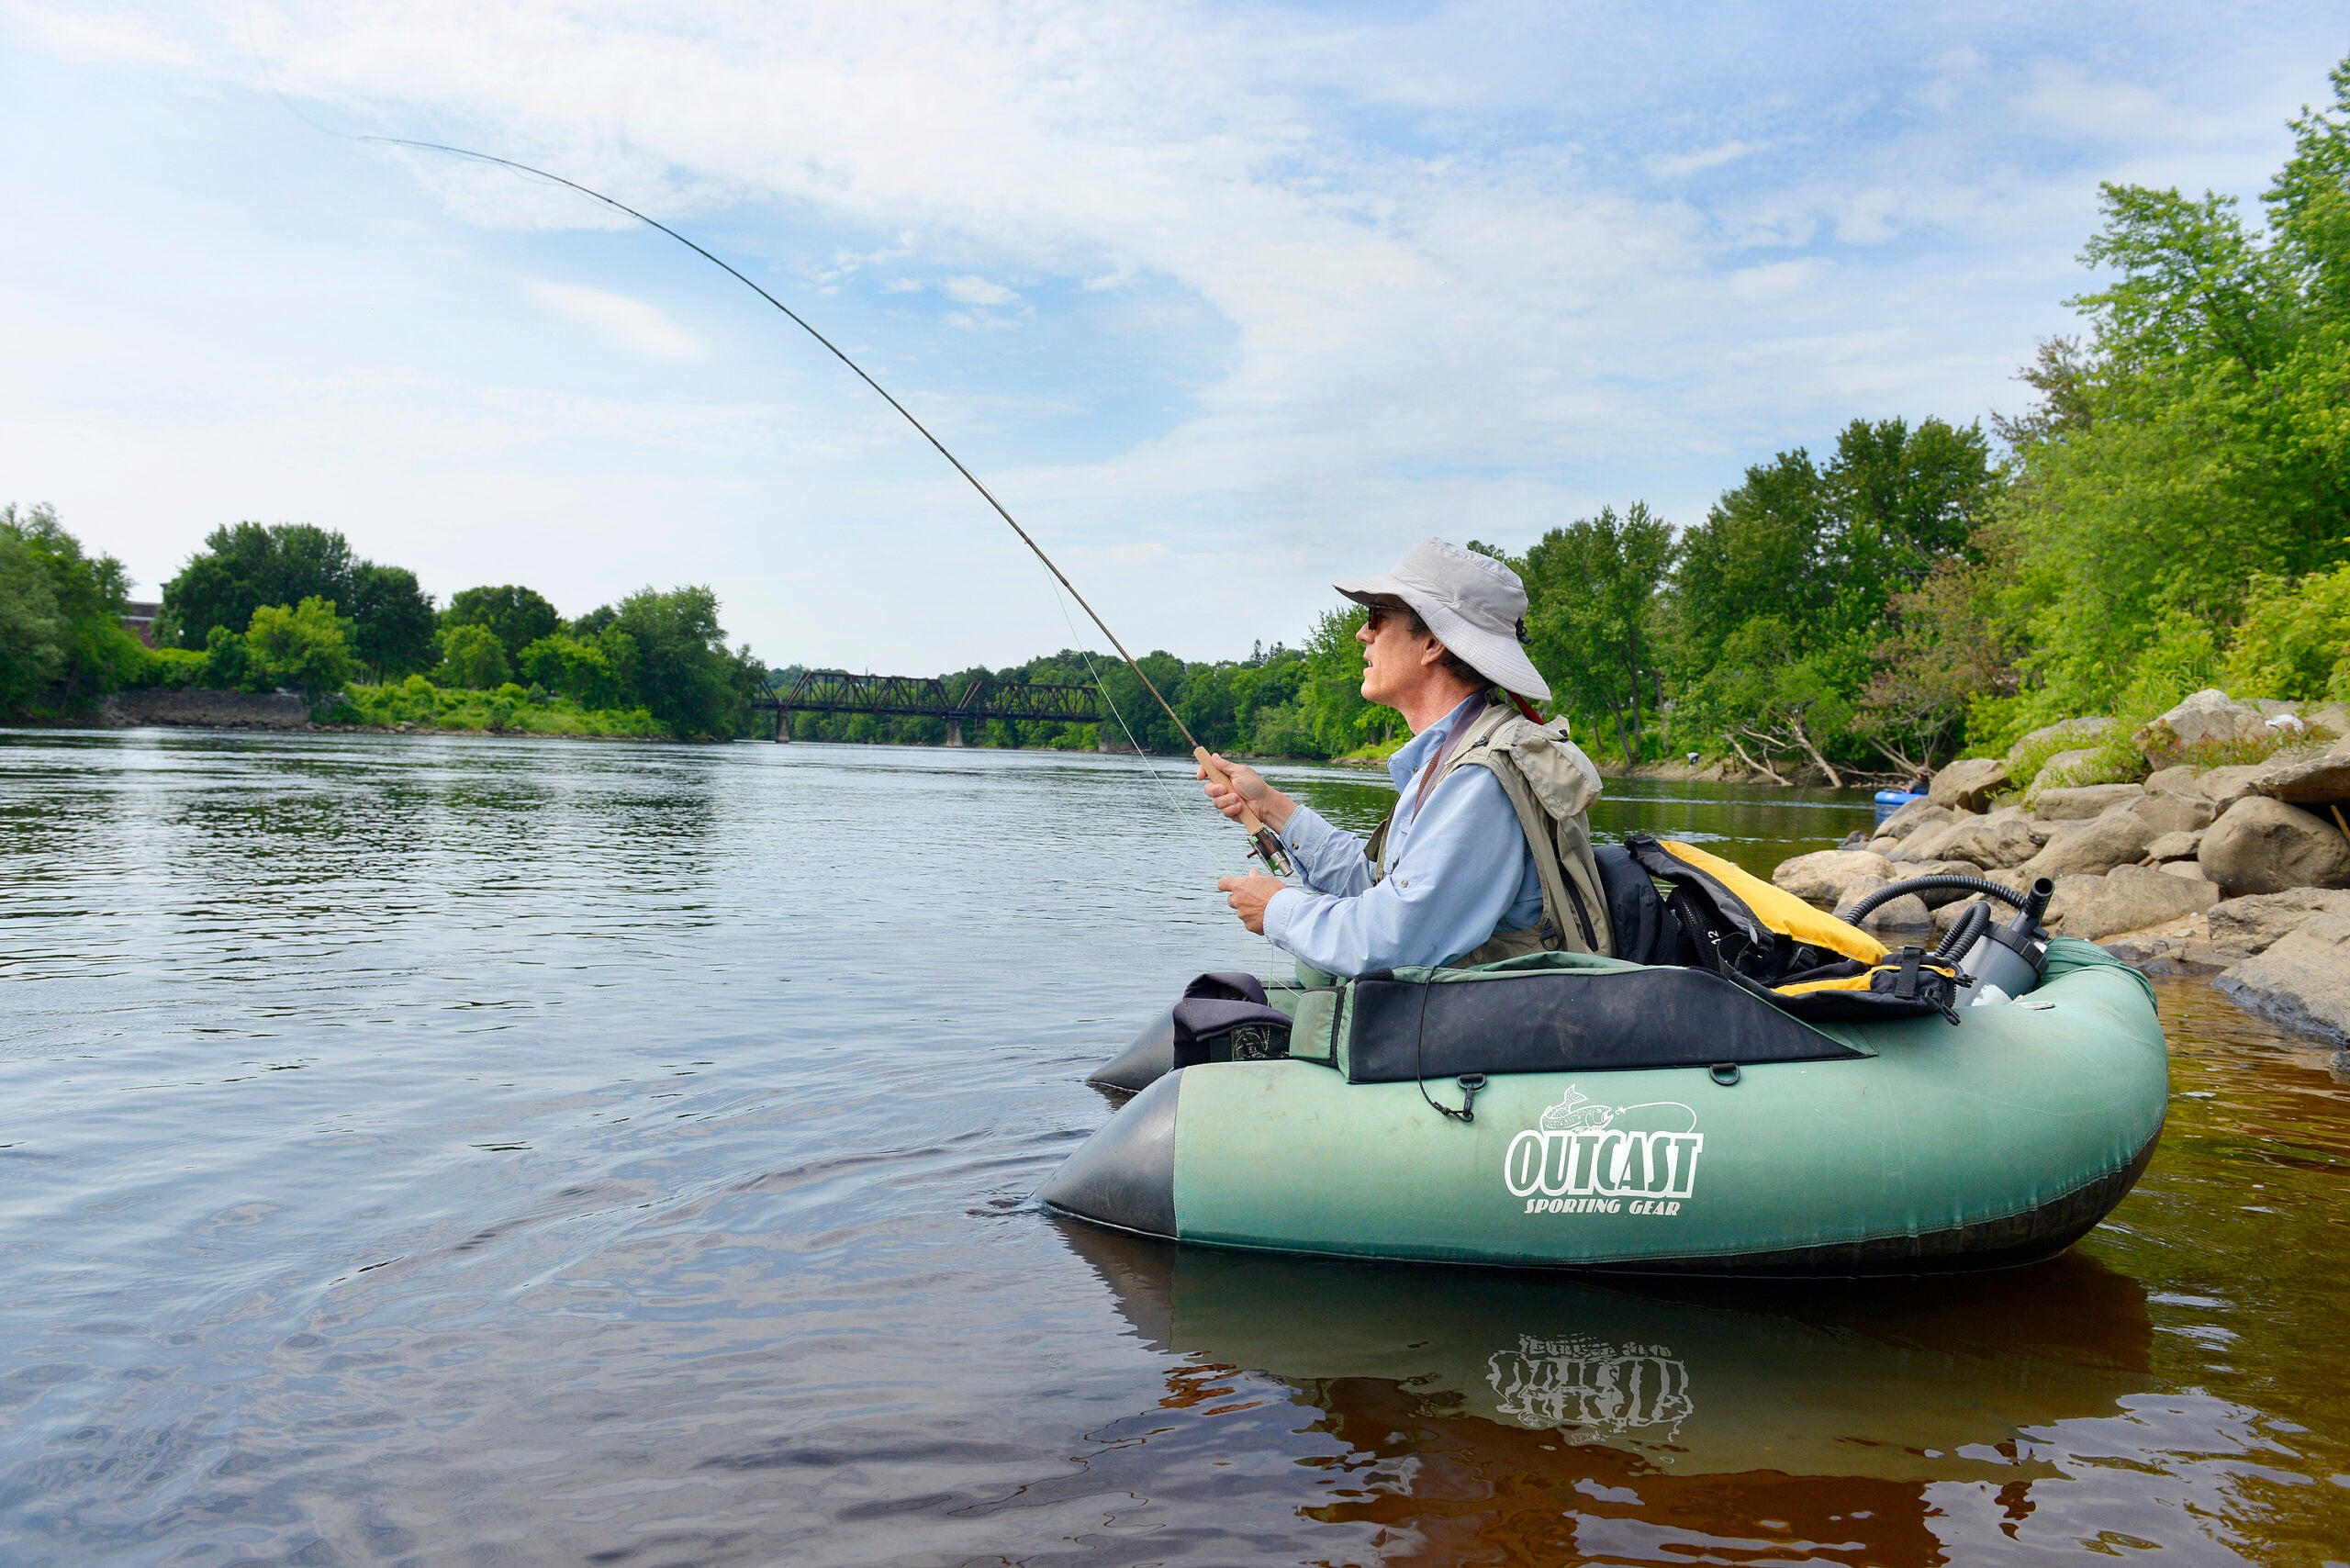 Start with Float Tube Fishing in 5 Steps